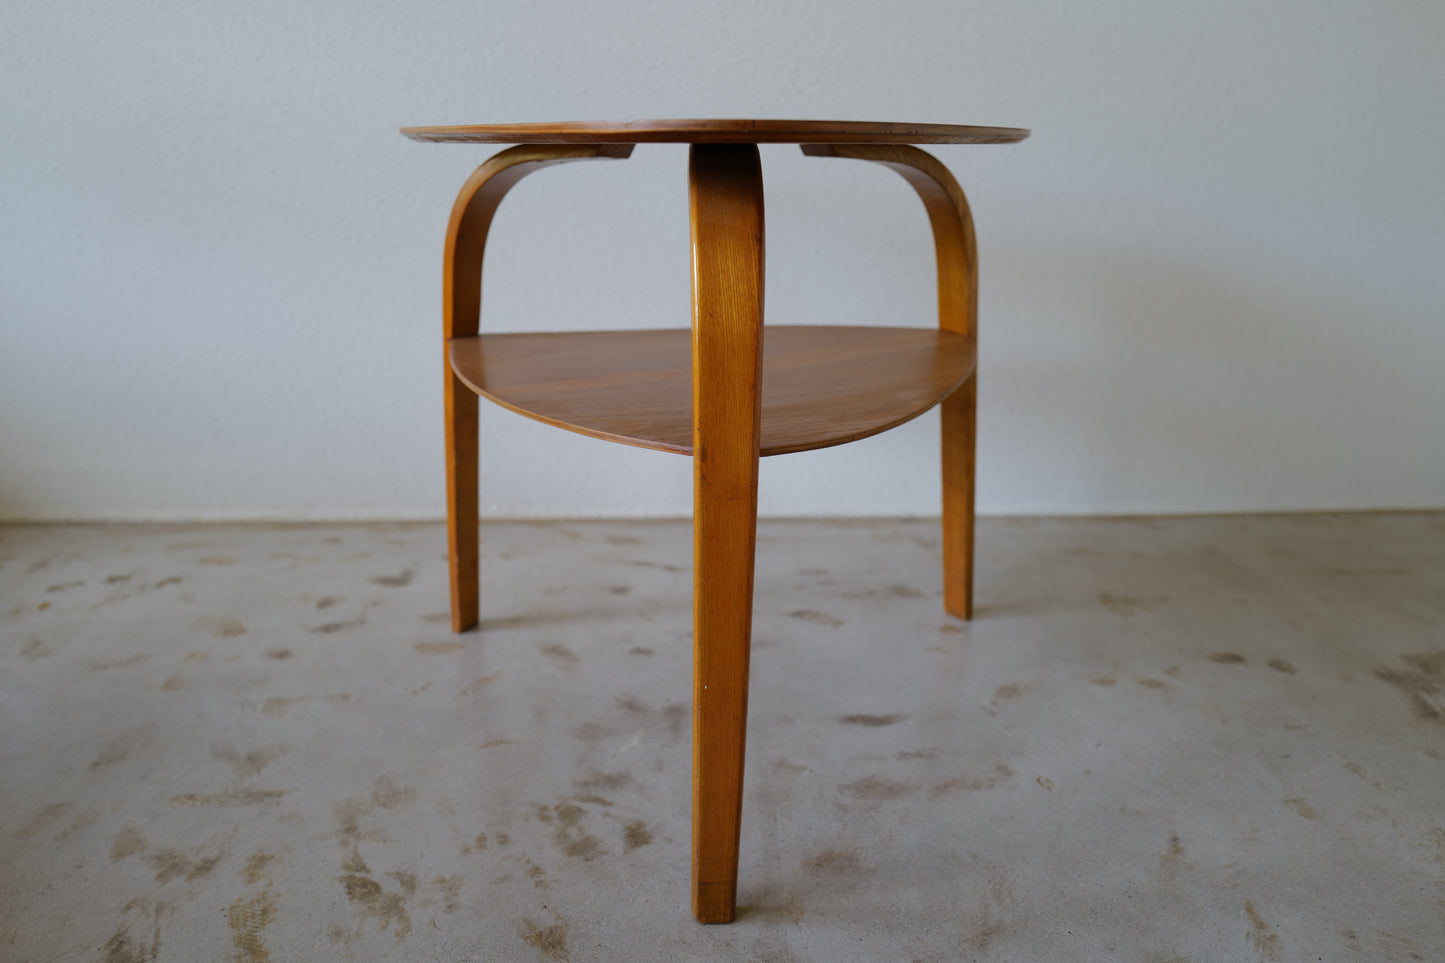 Bow wood Side table by Hugues Steiner.  France 1950s